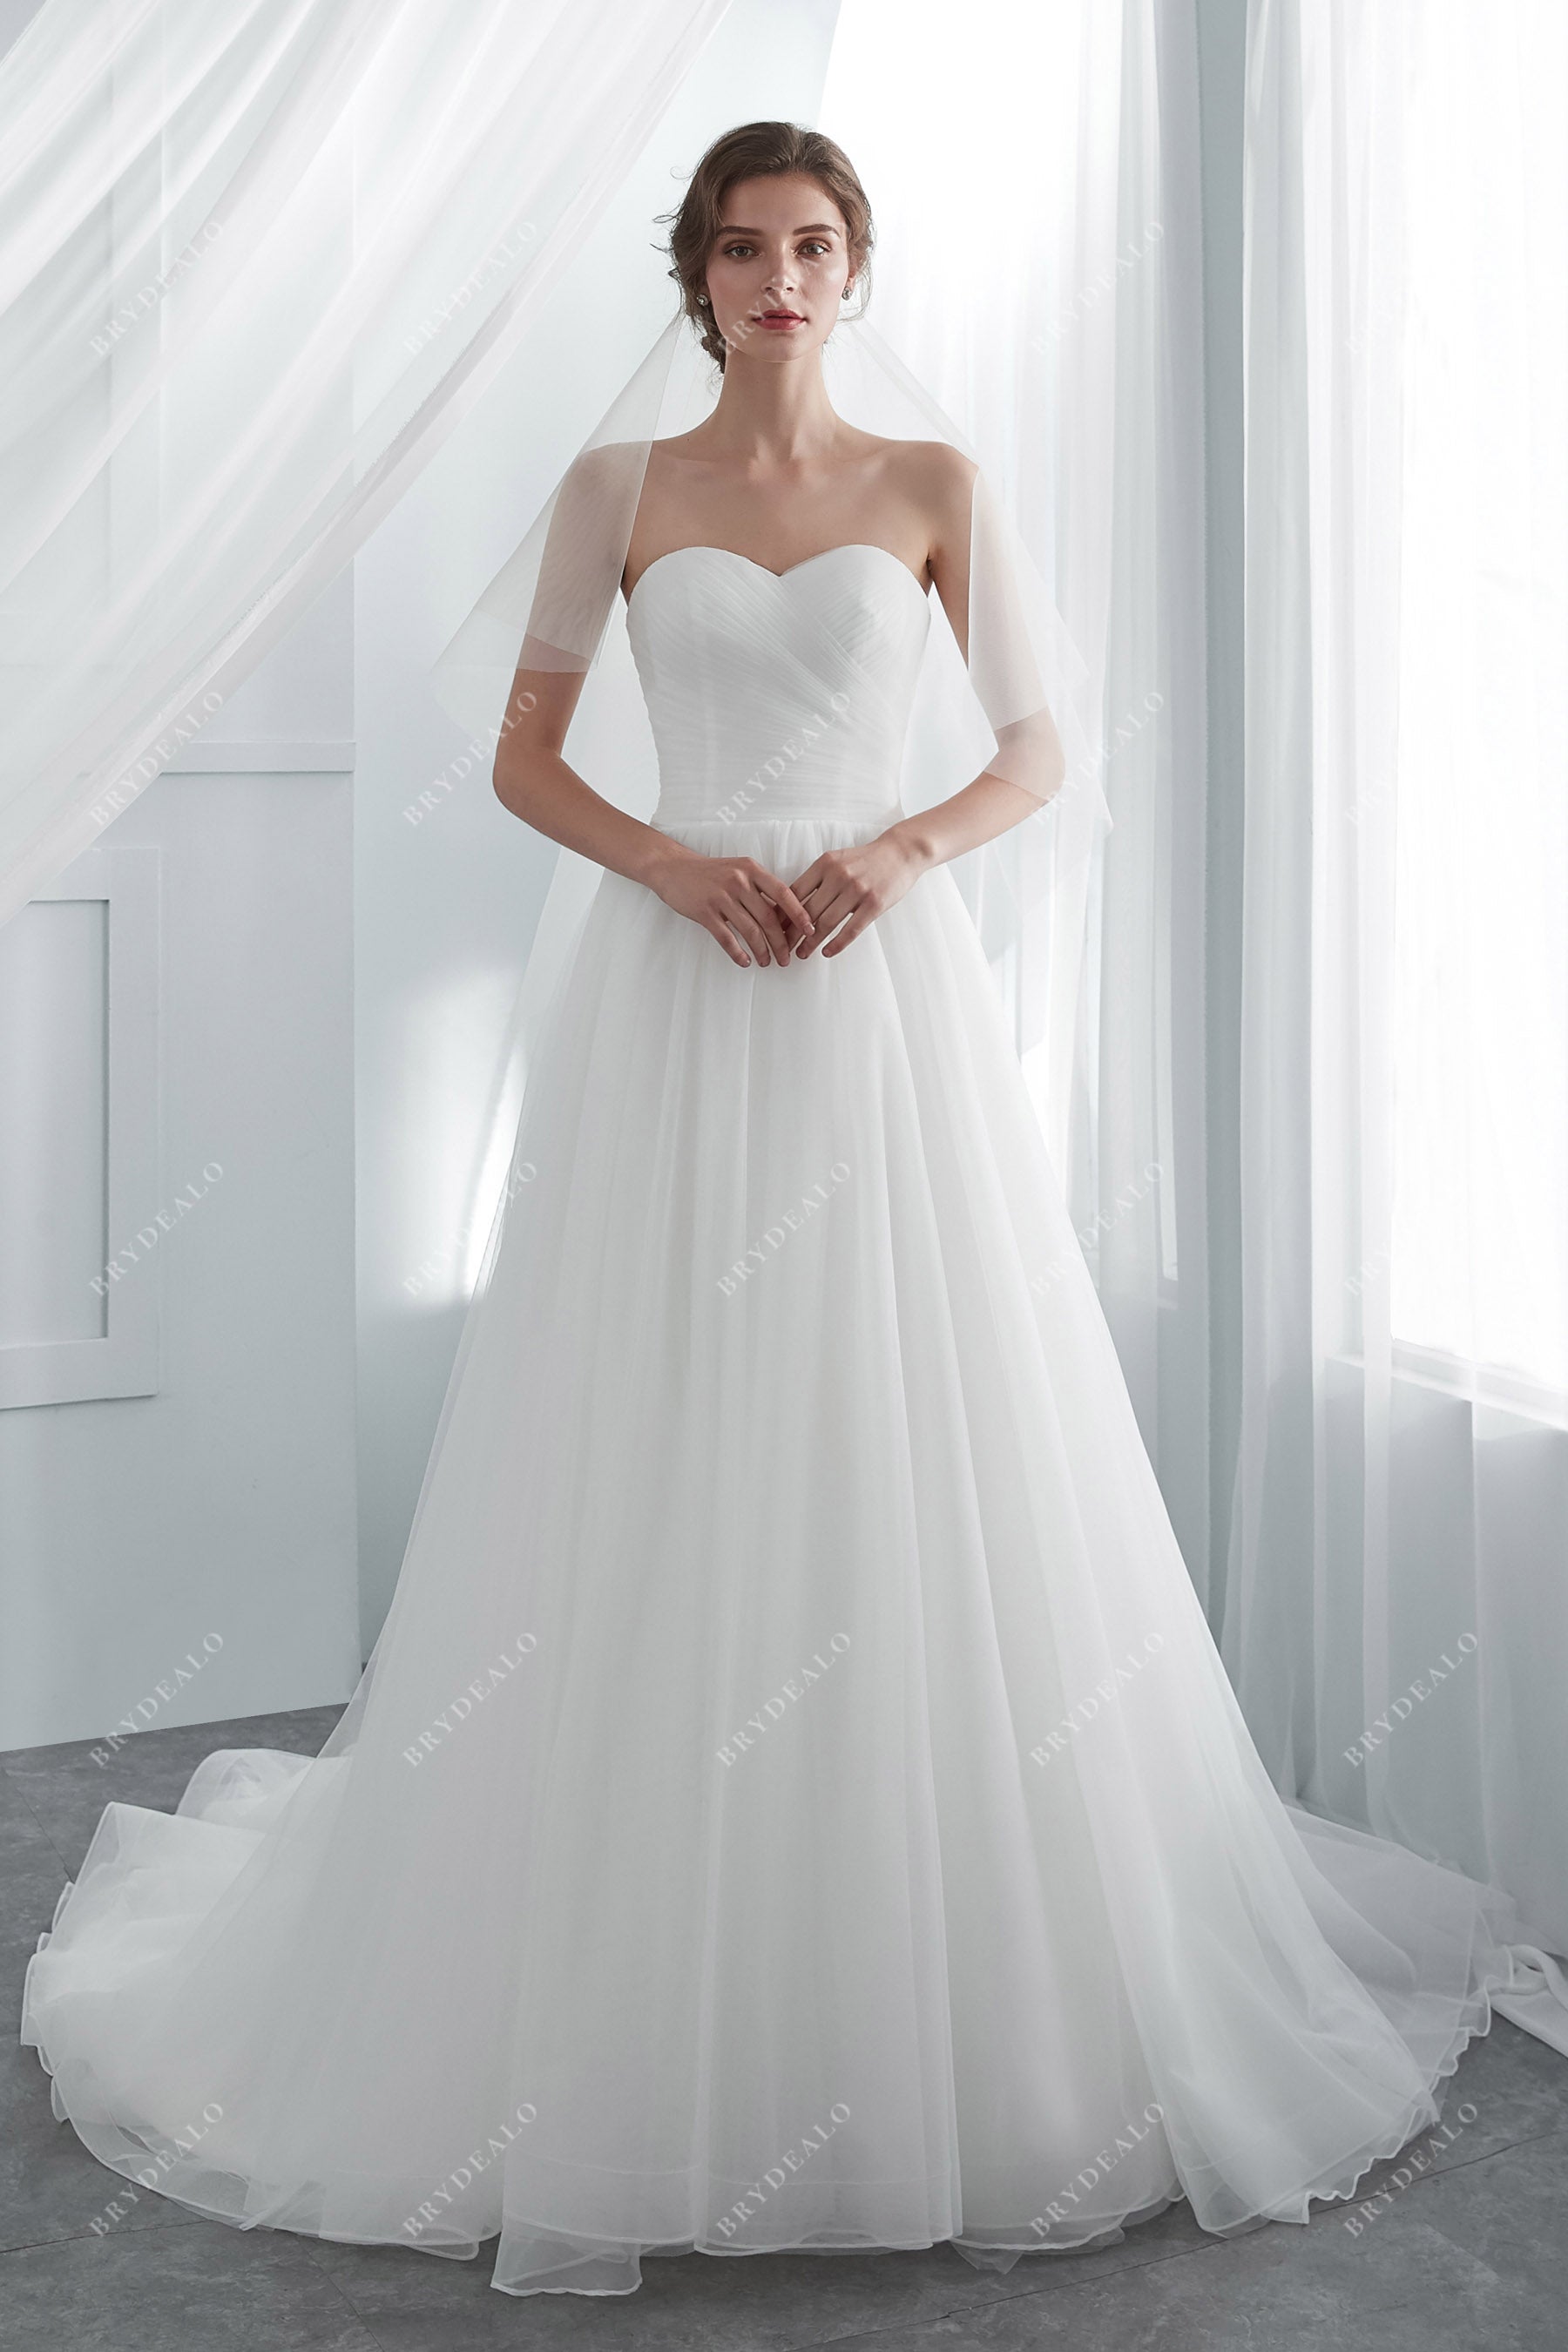 Simple Strapless Sweetheart A-line Bridal Gown